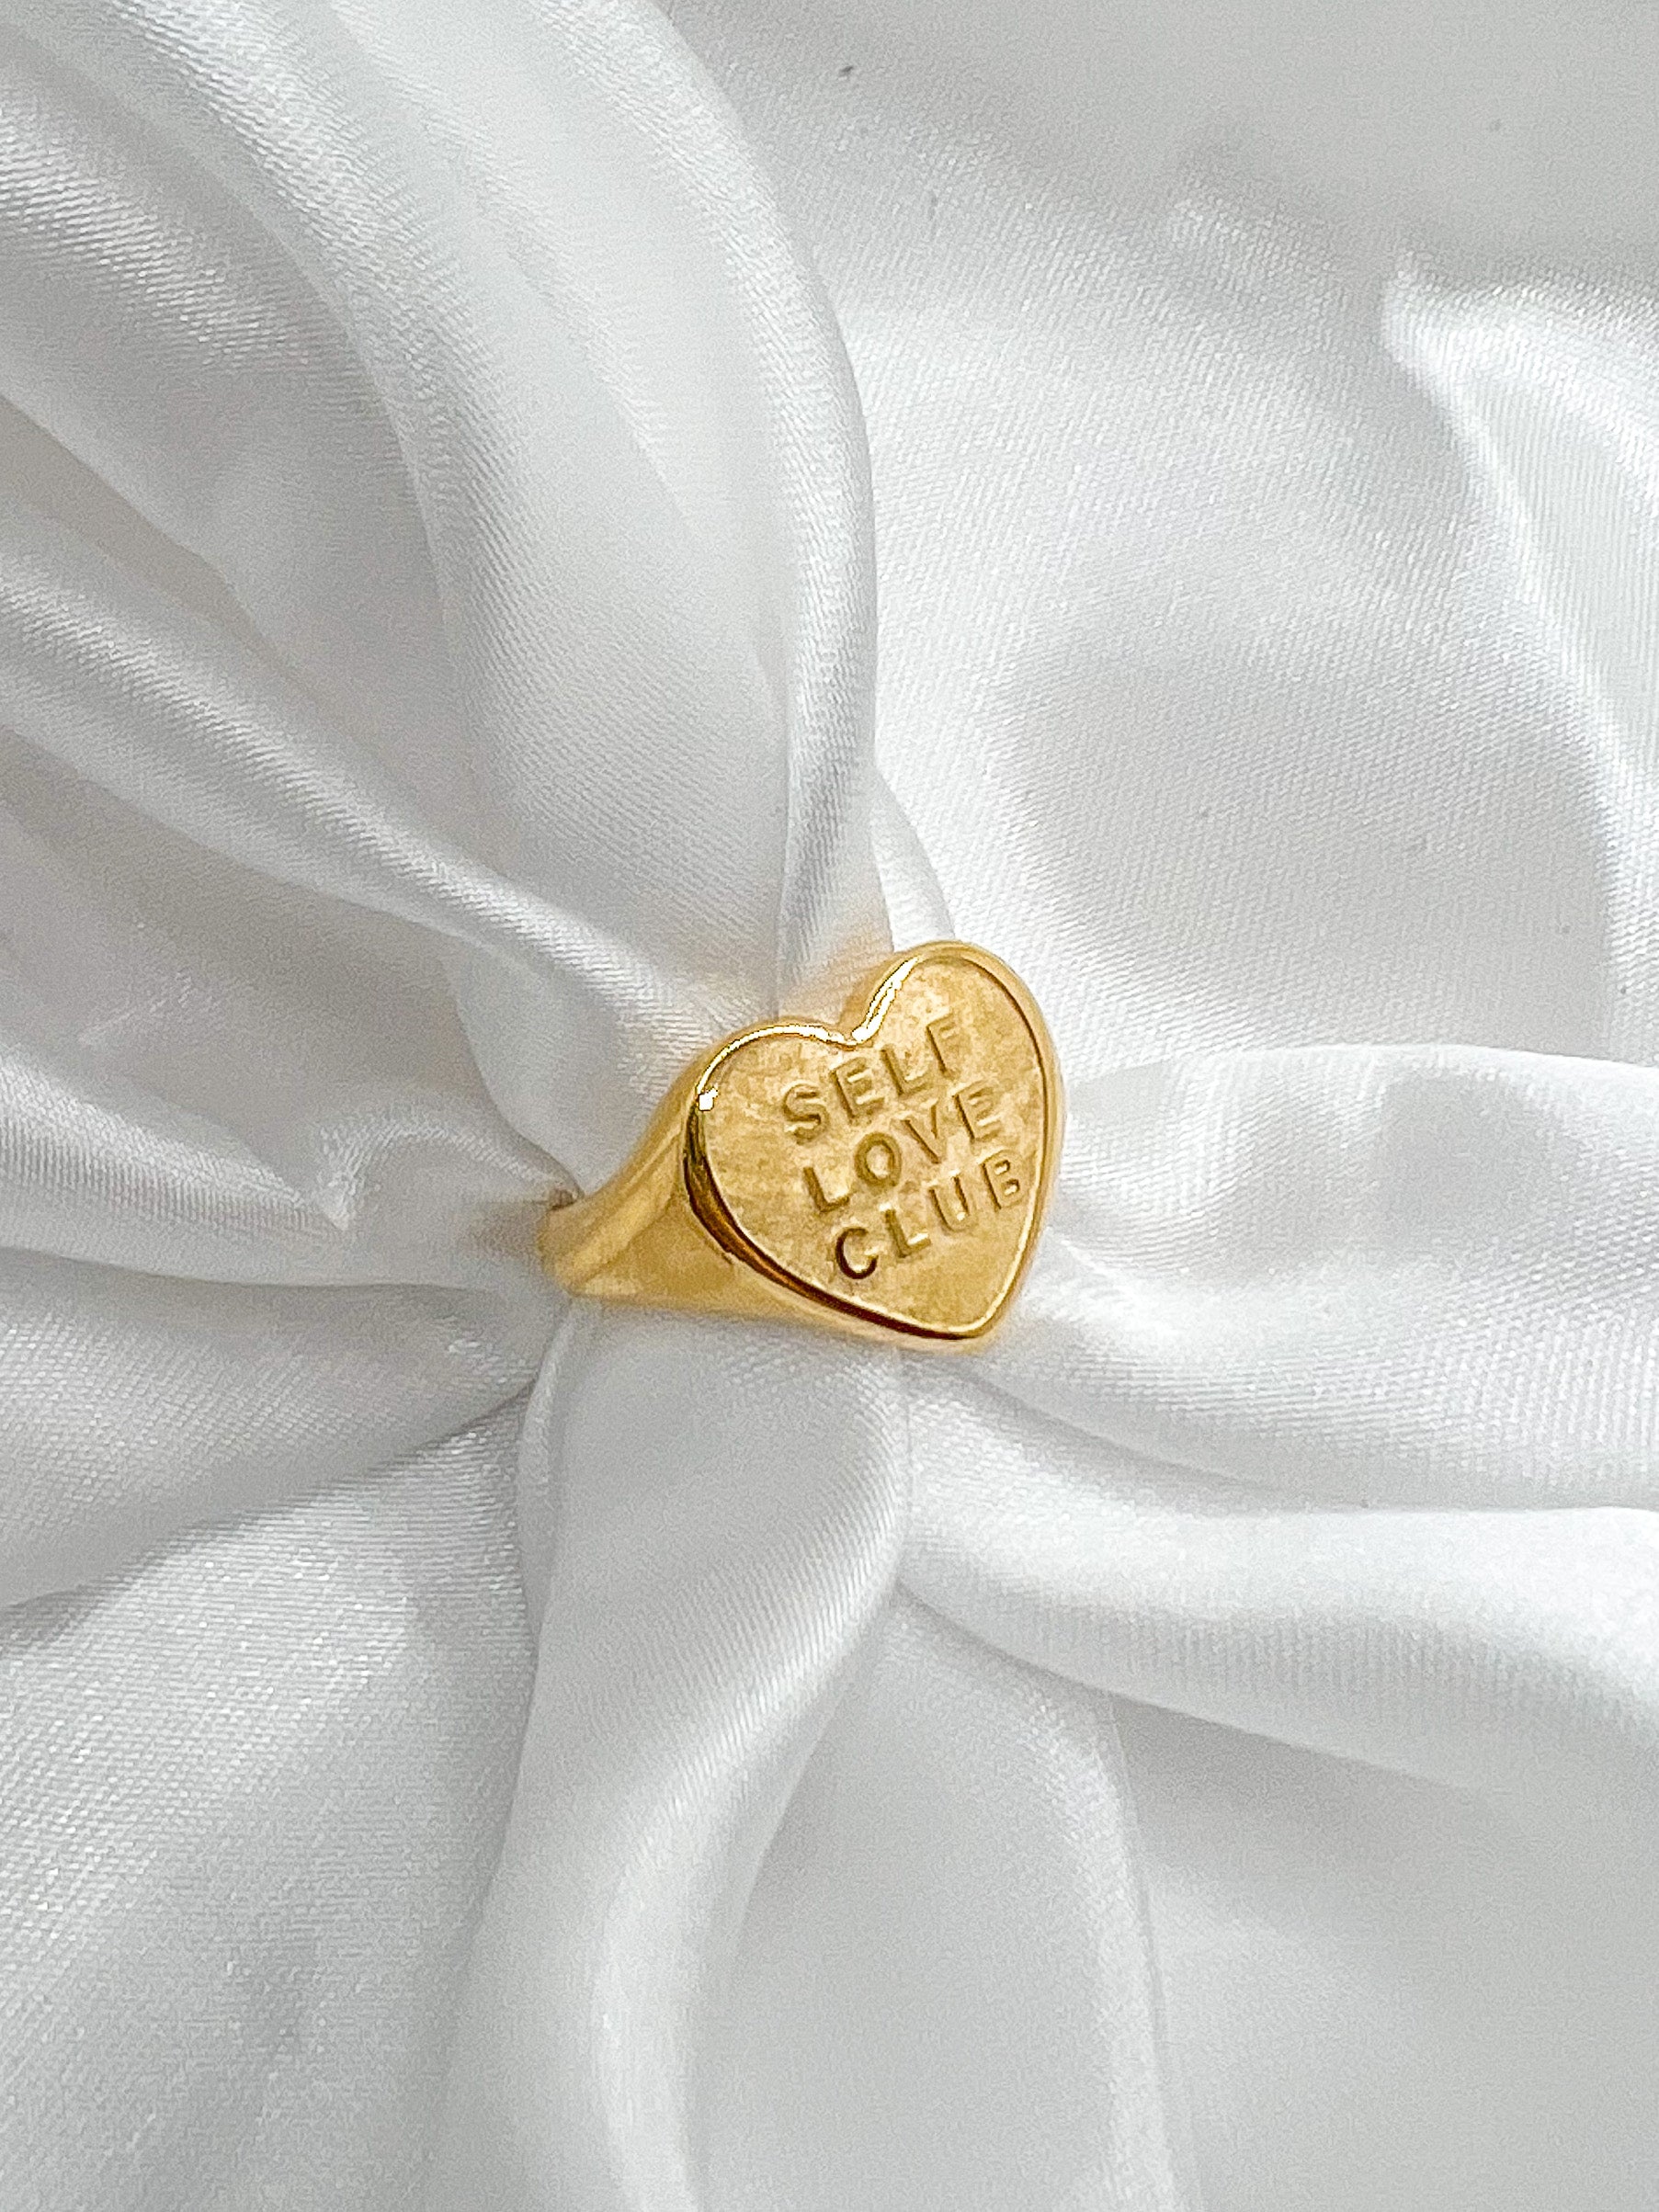 Self Love Club Ring - For the Girls Jewelry